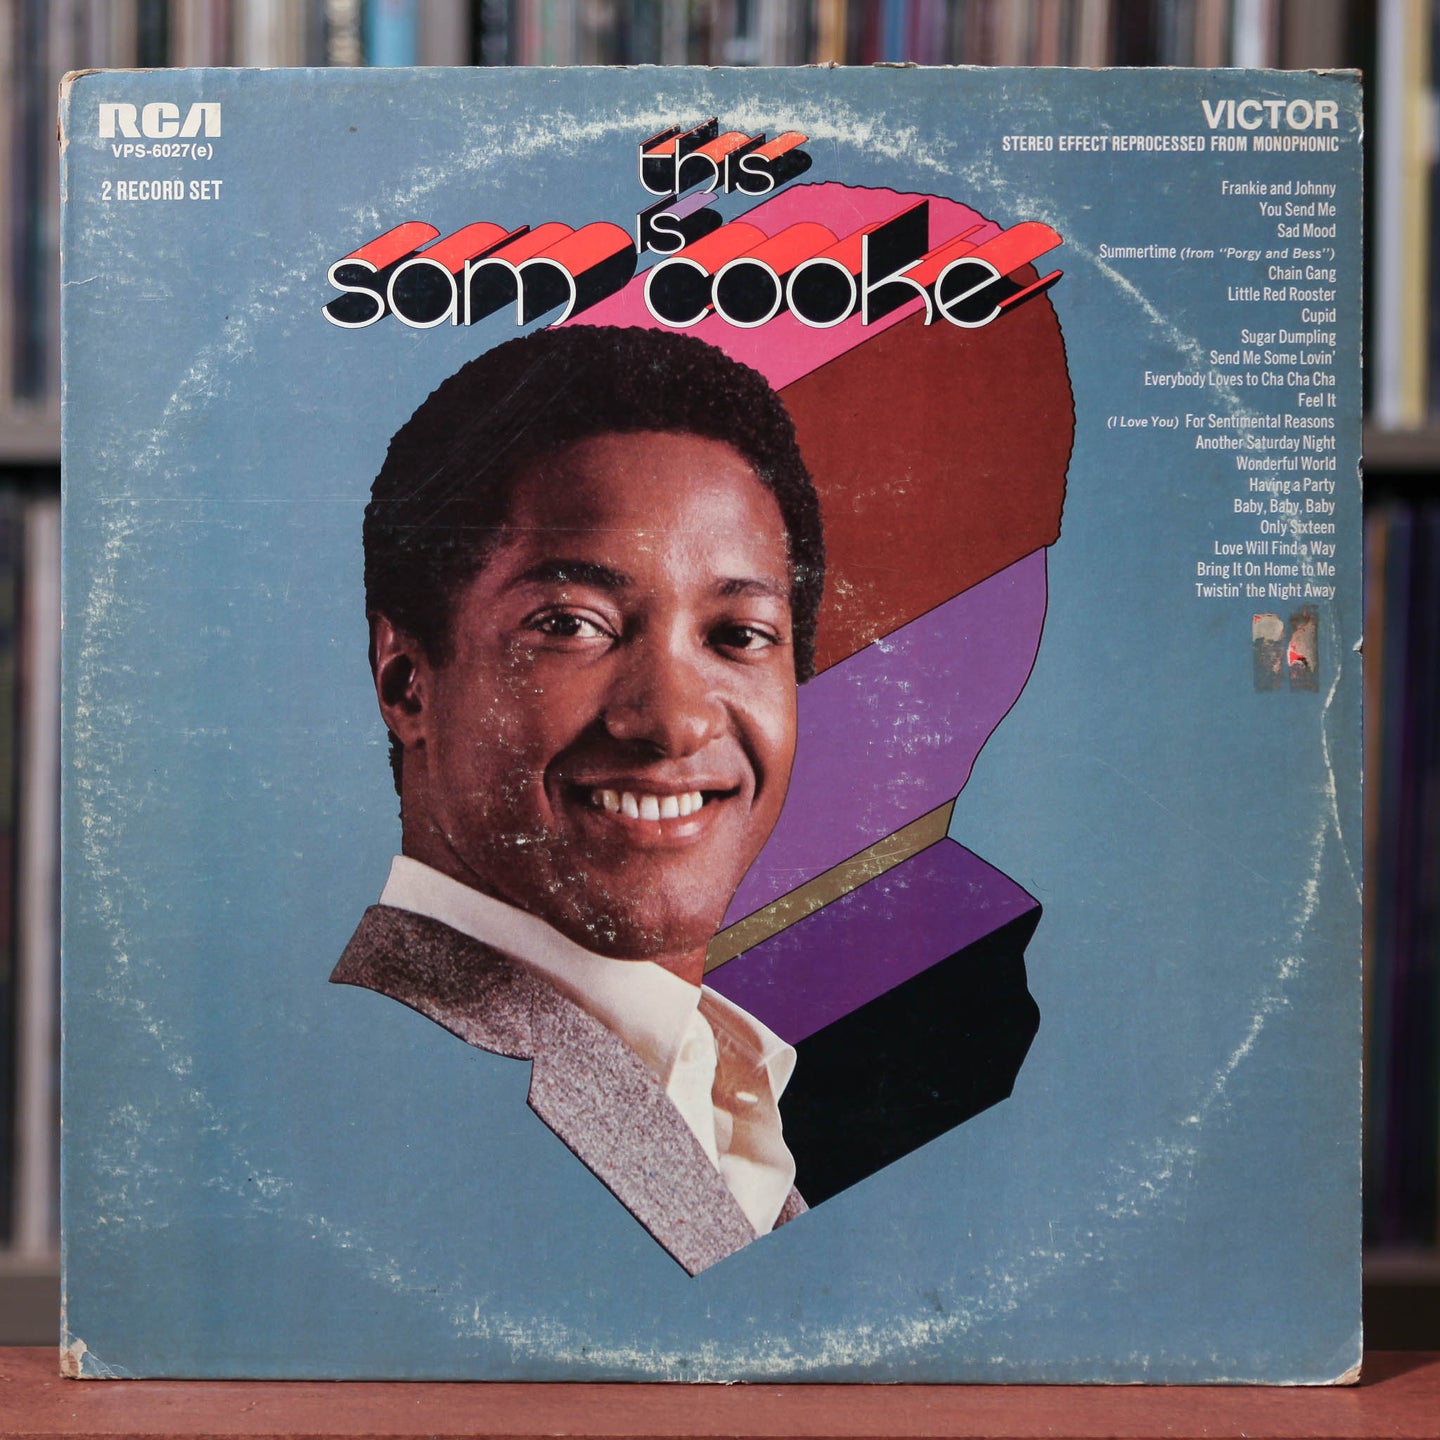 Sam Cooke - This Is Sam Cooke - 2LP - 1976 RCA